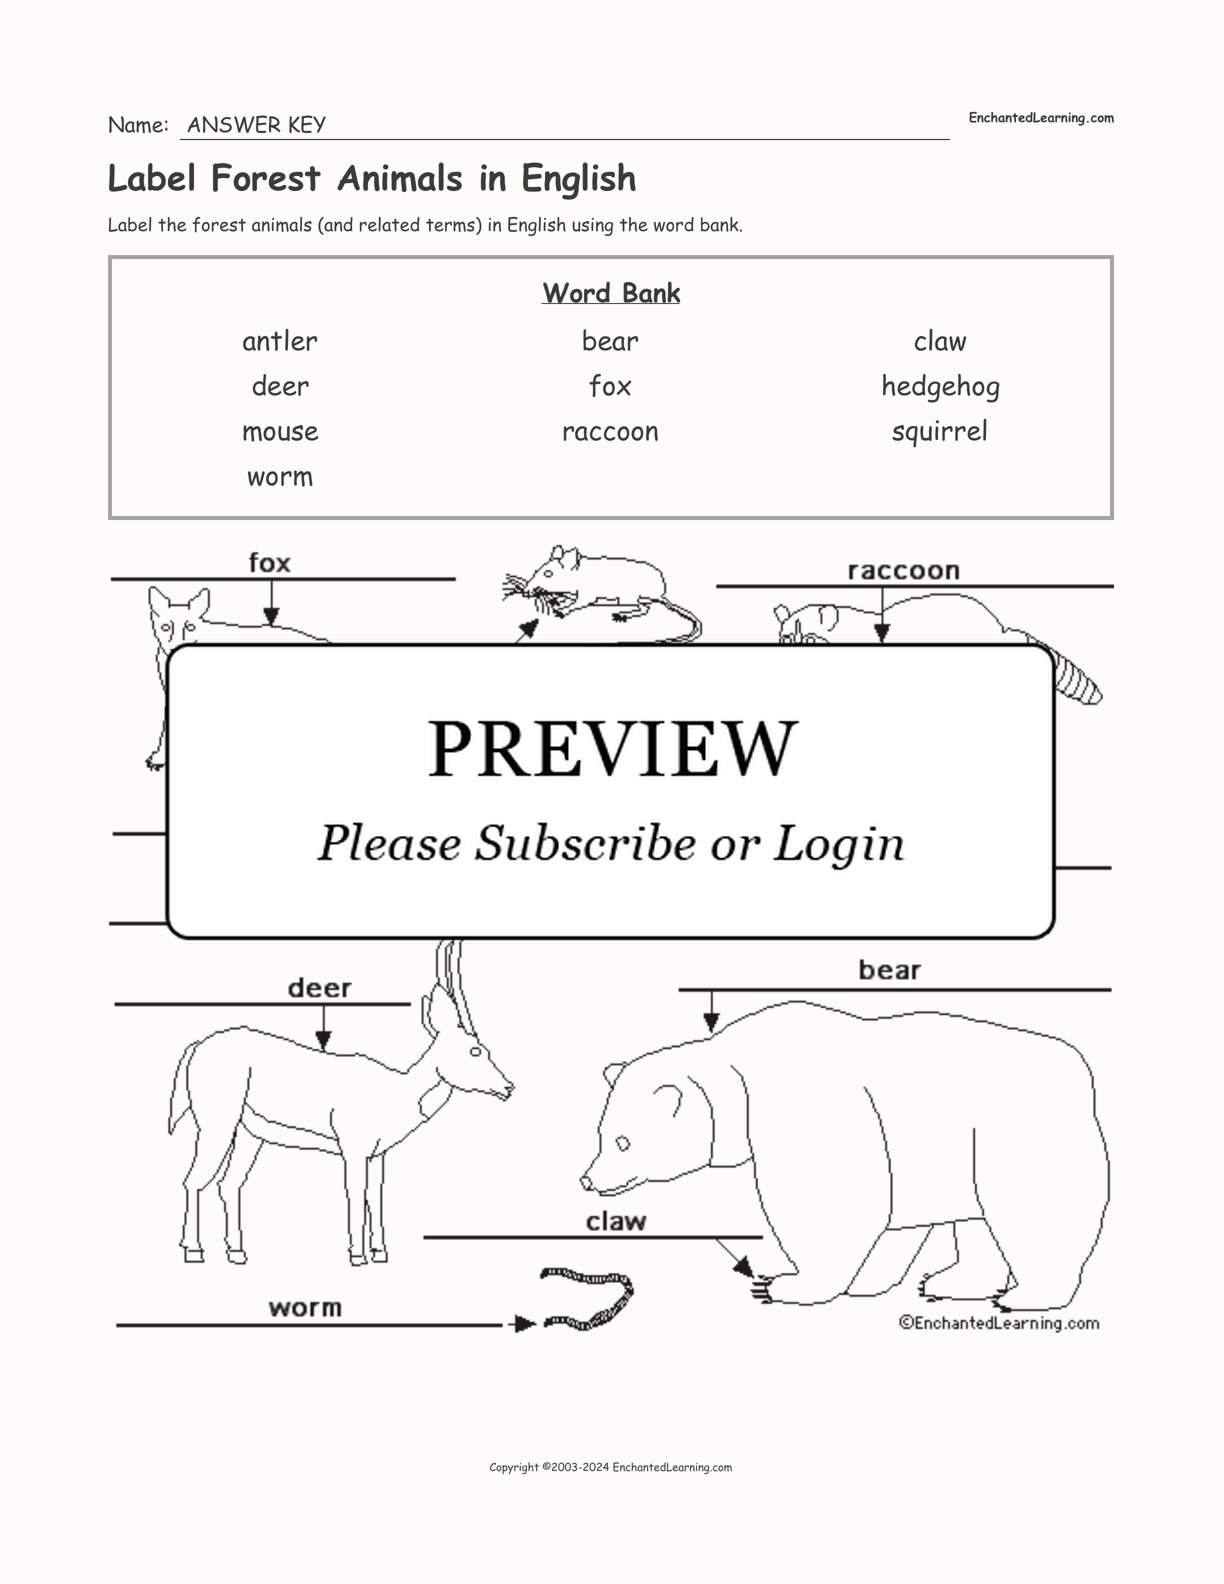 Label Forest Animals in English interactive worksheet page 2